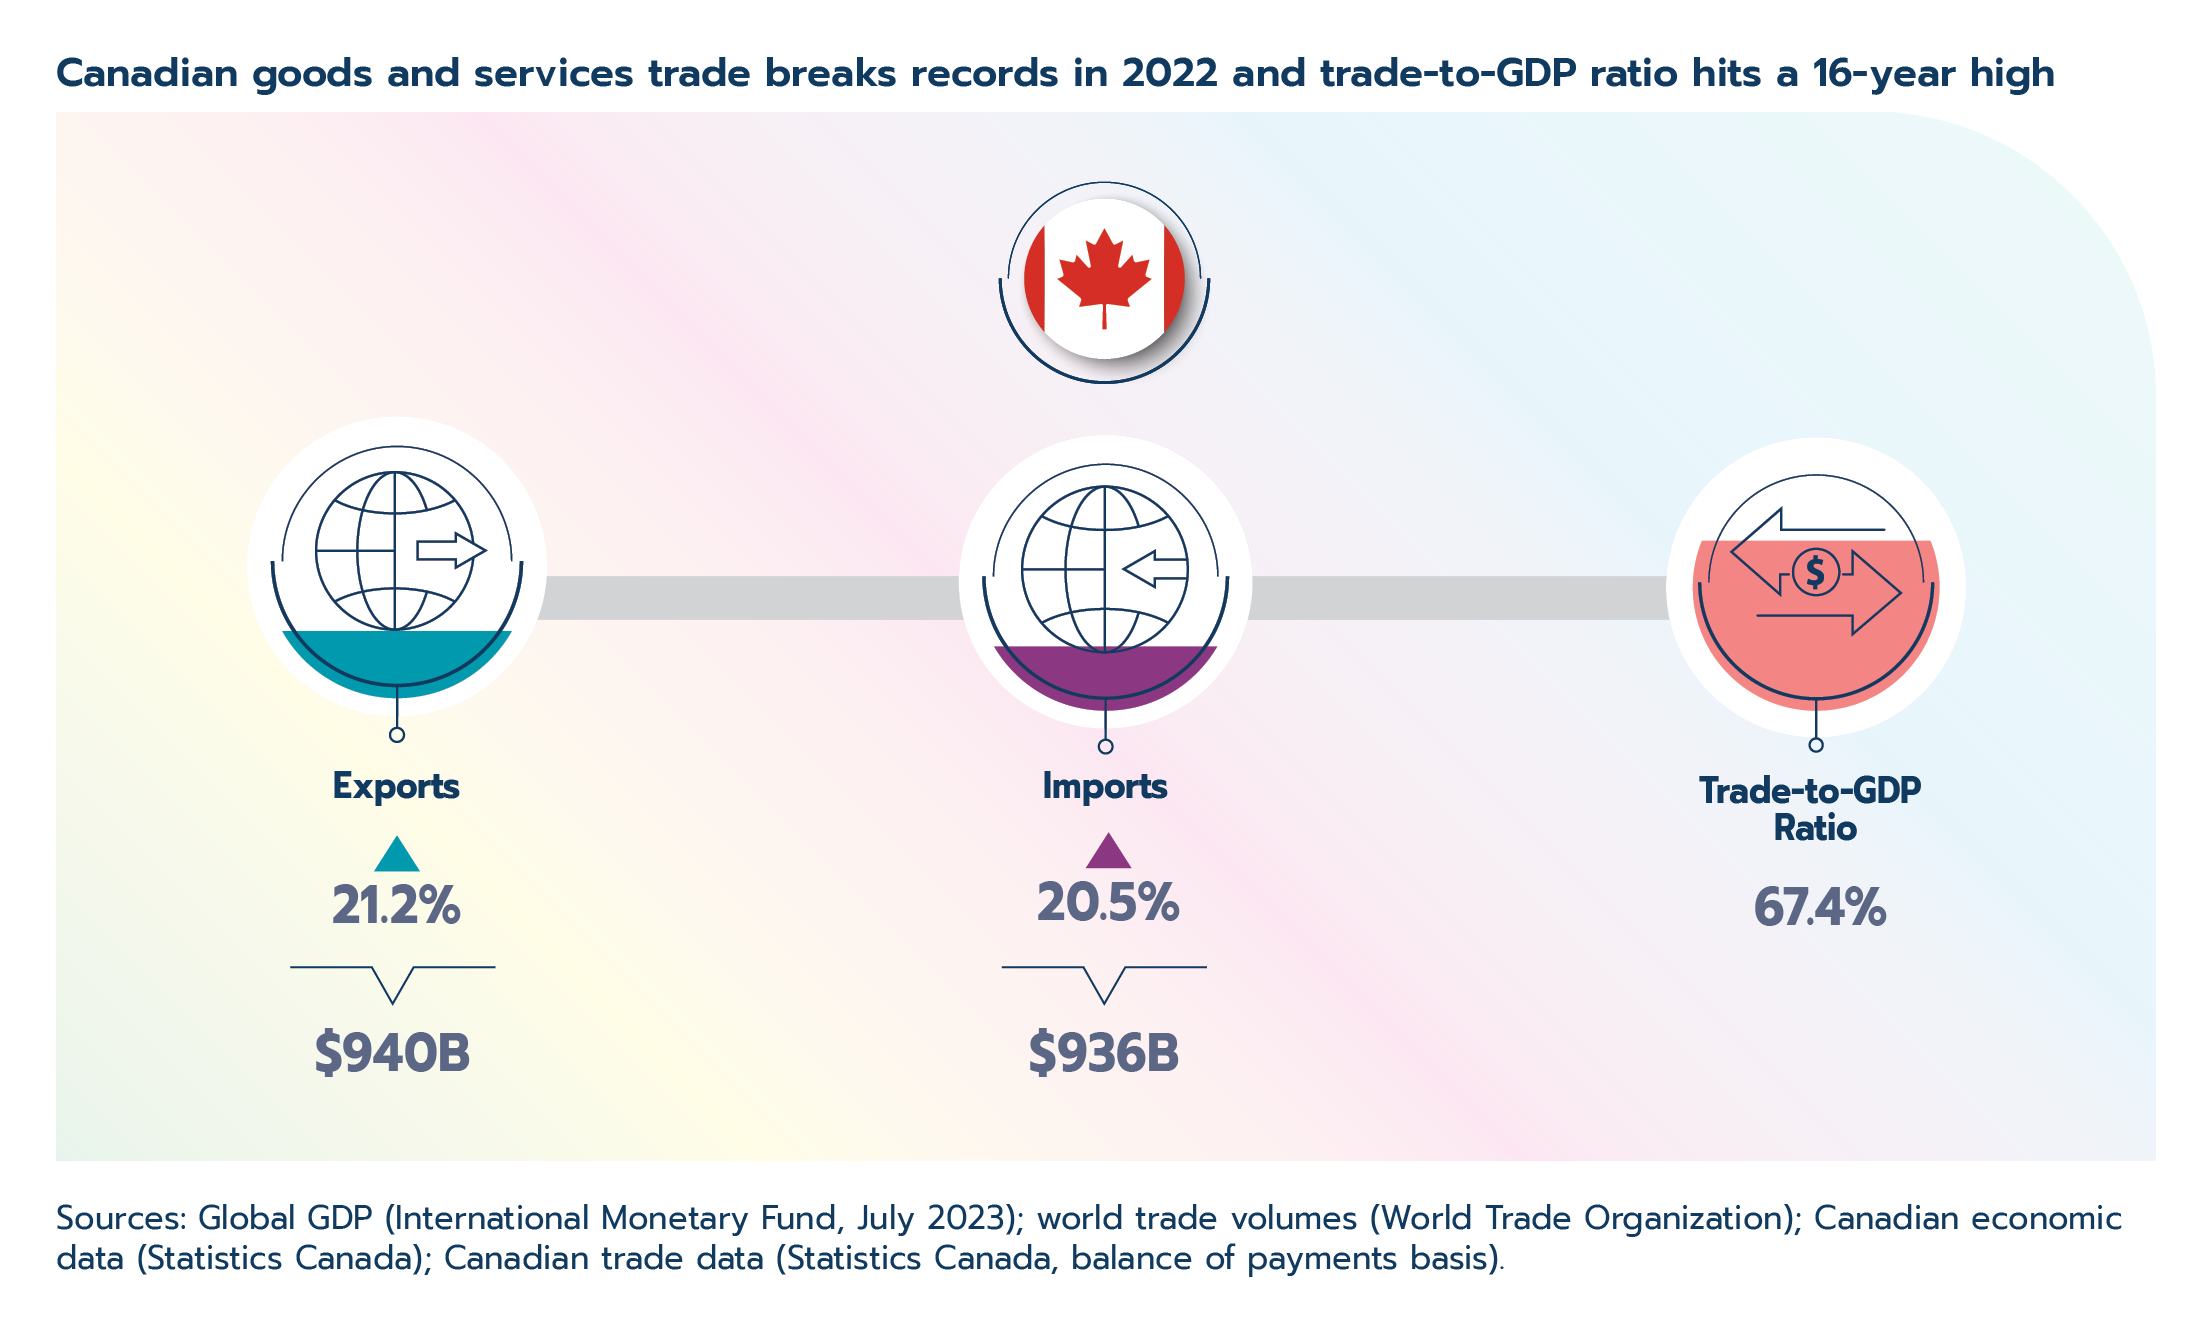 Canadian goods and services trade breaks records in 2022 and trade-to-GDP ratio reached a 16-year high